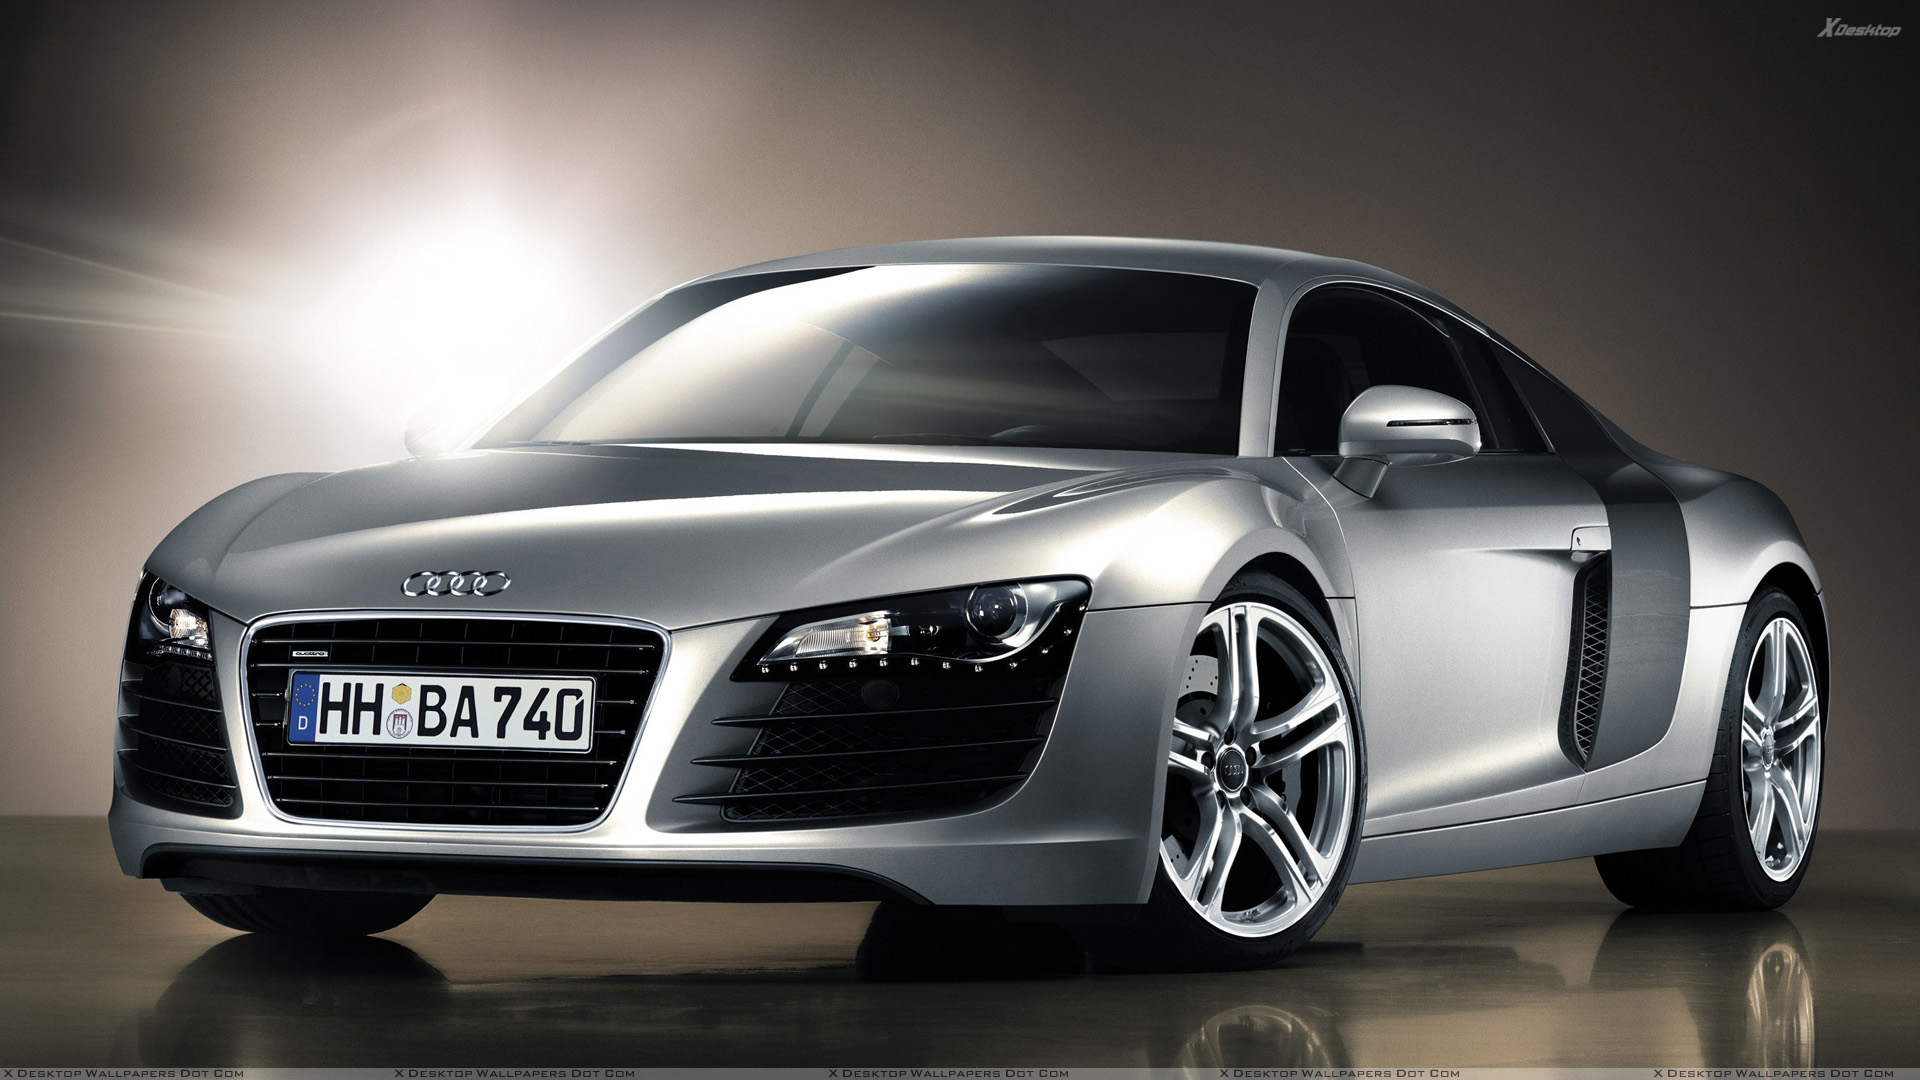 Front Pose Of 2006 Audi R8 In Silver Wallpaper 1920x1080